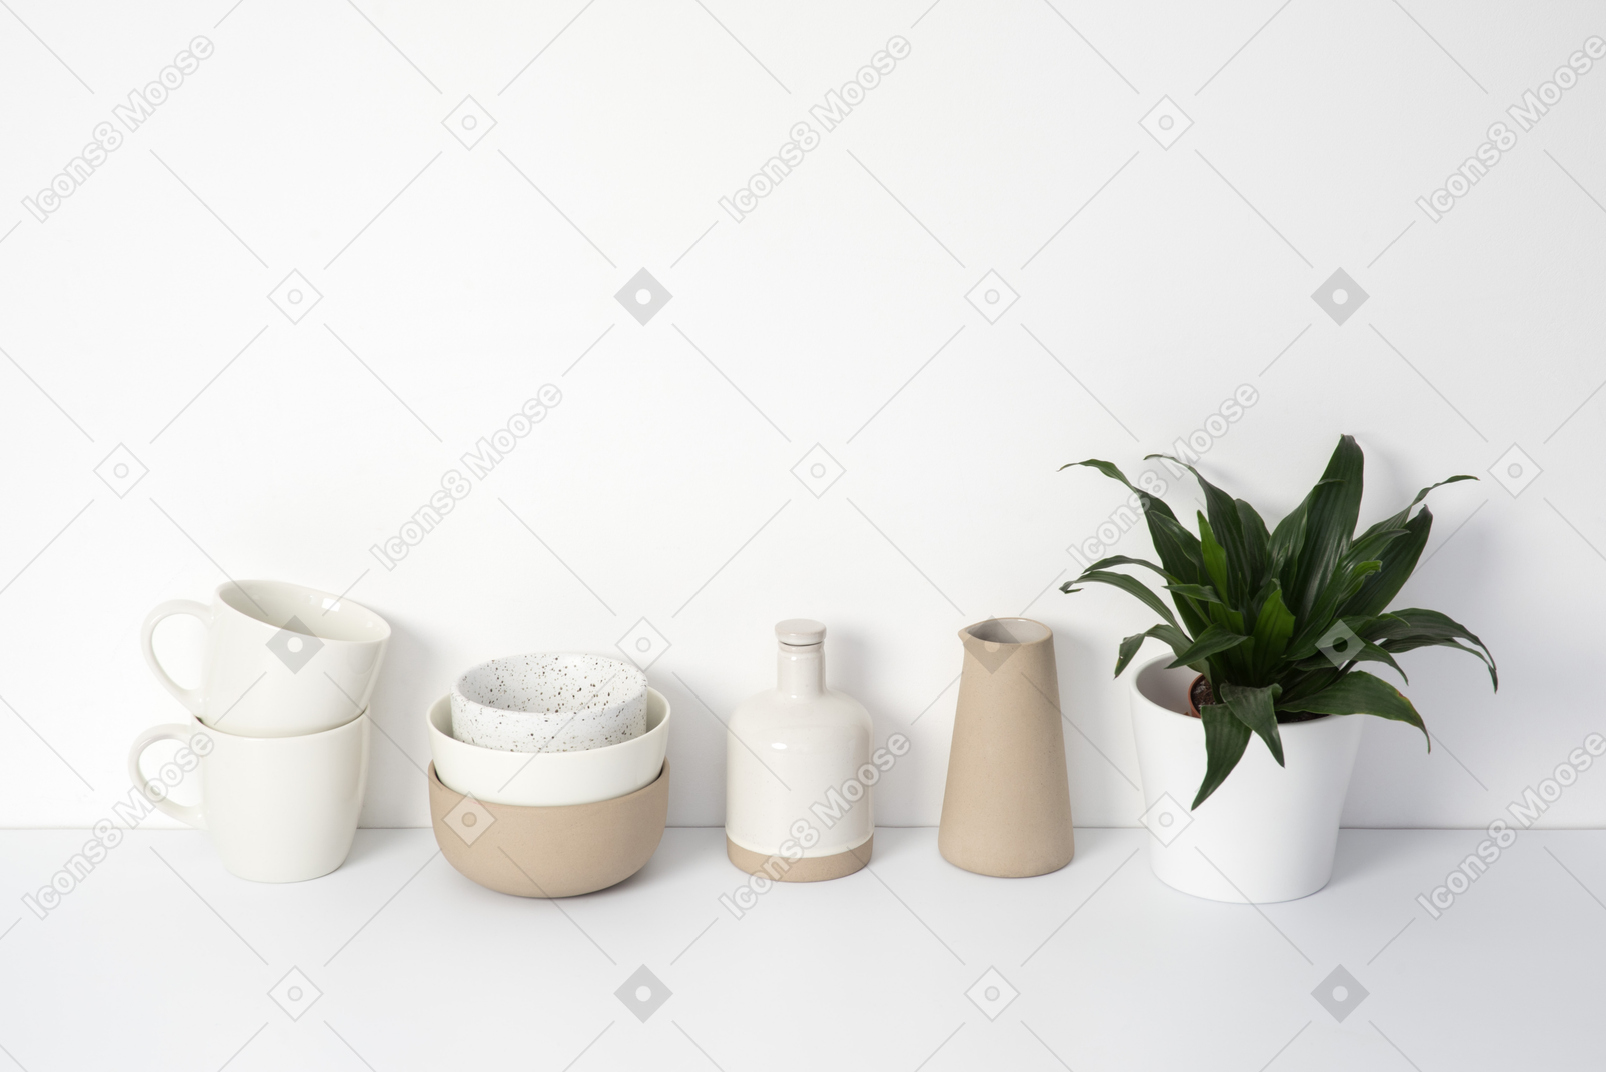 Ceramic kitchenware and house plant